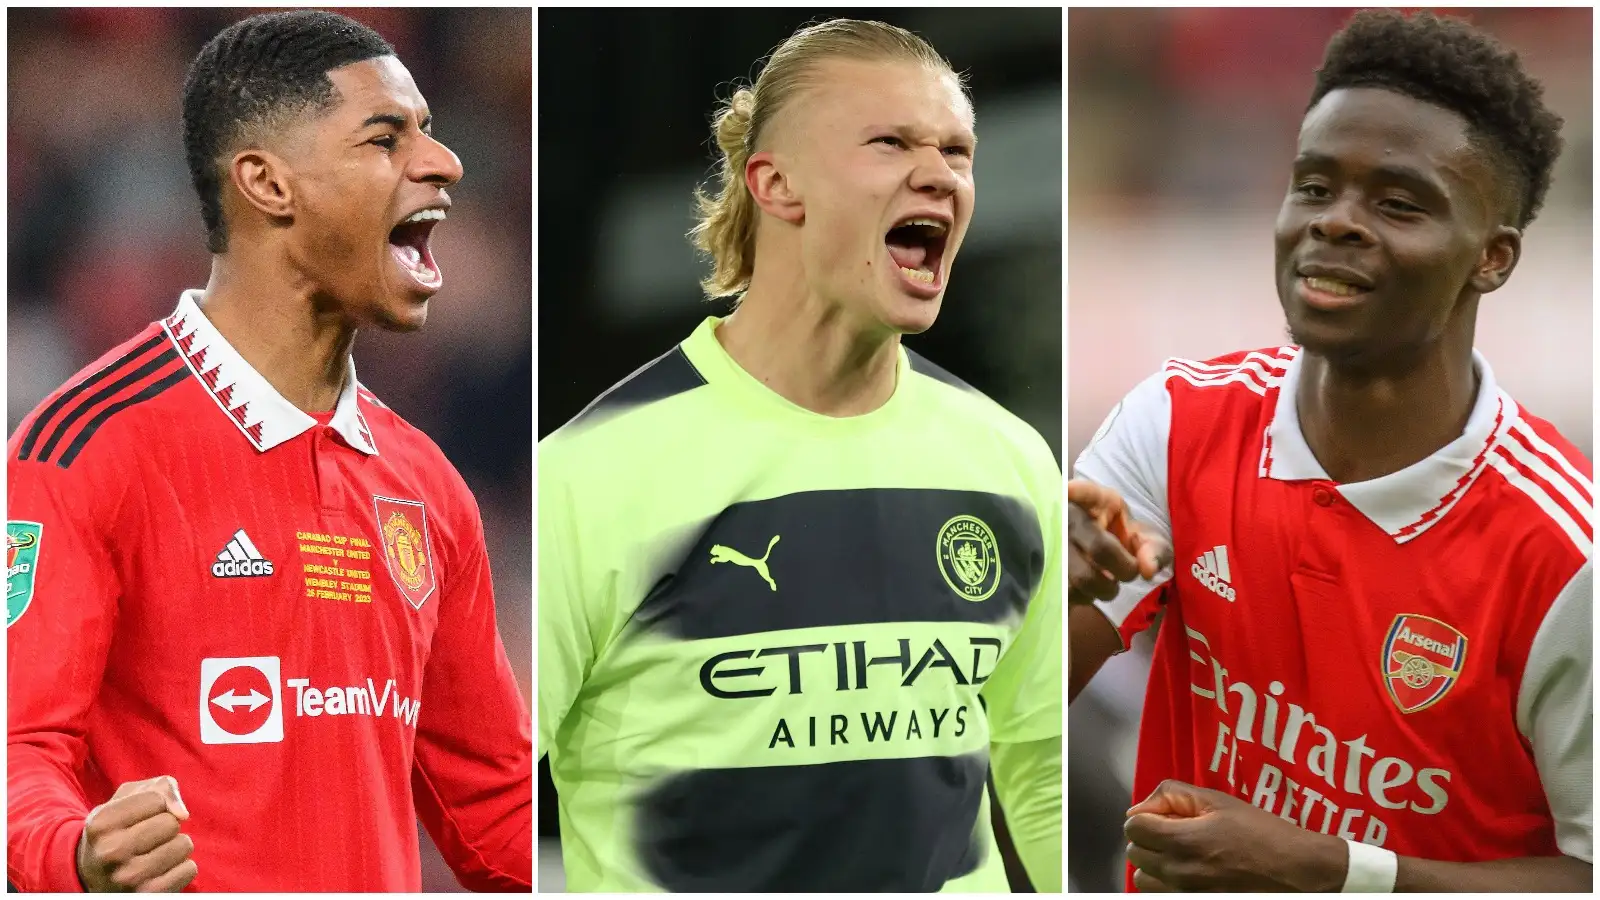 Marcus Rashford, Erling Haaland and Bukayo Saka are all in contention for the PFA Player of the Year award.